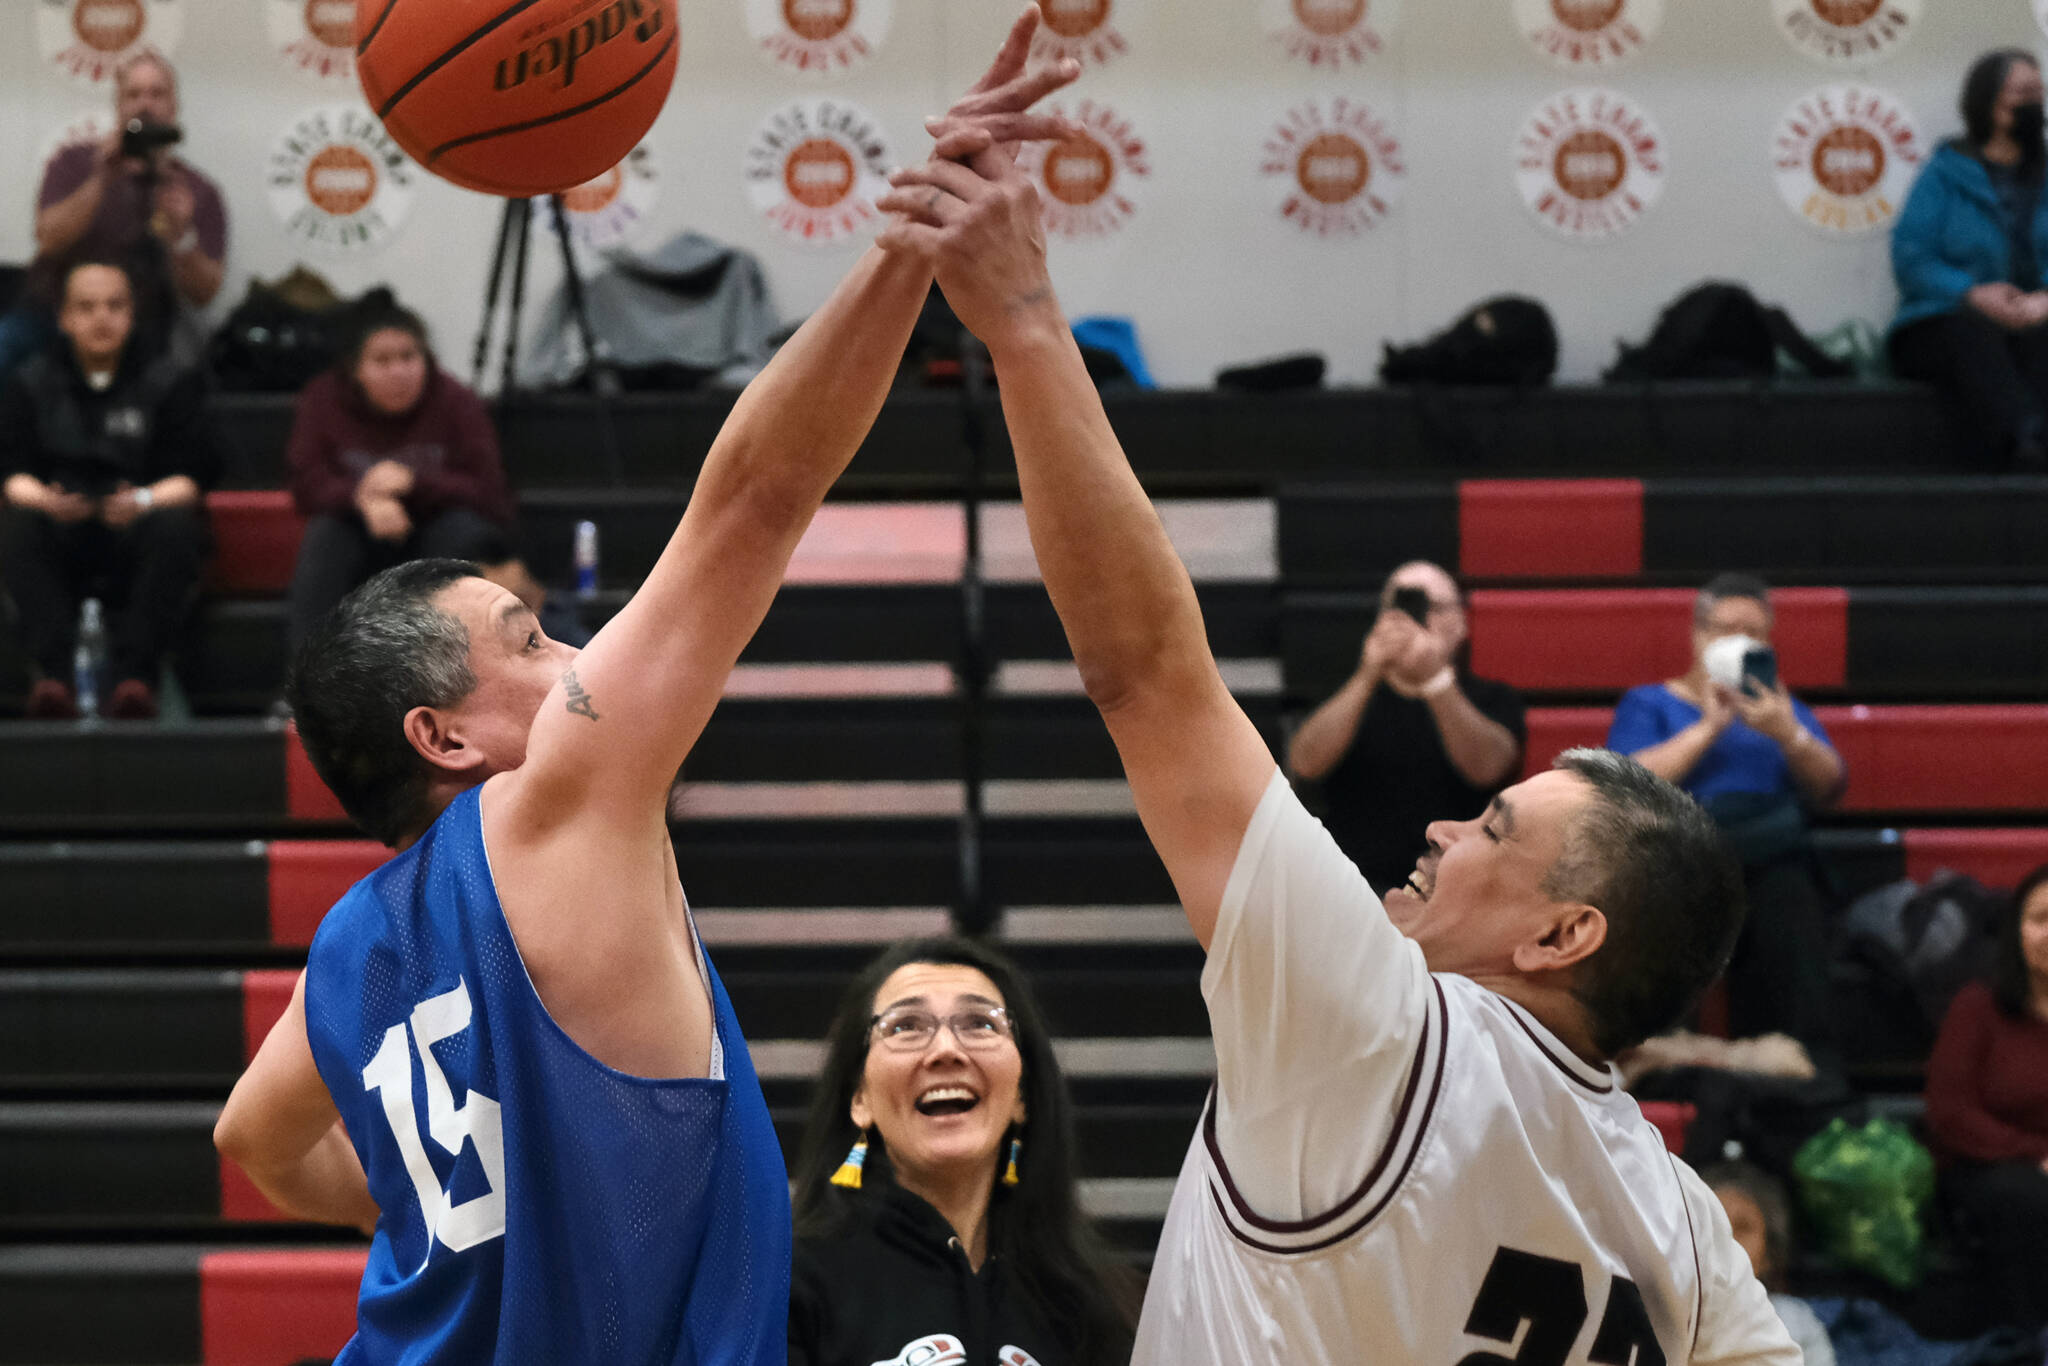 U.S. Rep. Mary Peltola put up the ceremonial jump ball for Kake's Rich Austin (15) and Hoonah's Albert Hinchman (22) during their Masters Bracket game in the Juneau Lions Club 74th Annual Gold Medal Basketball Tournament, Sunday, March 19, at the Juneau-Douglas High School: Yadaa.at Kalé gymnasium. (Klas Stolpe / For the Juneau Empire)